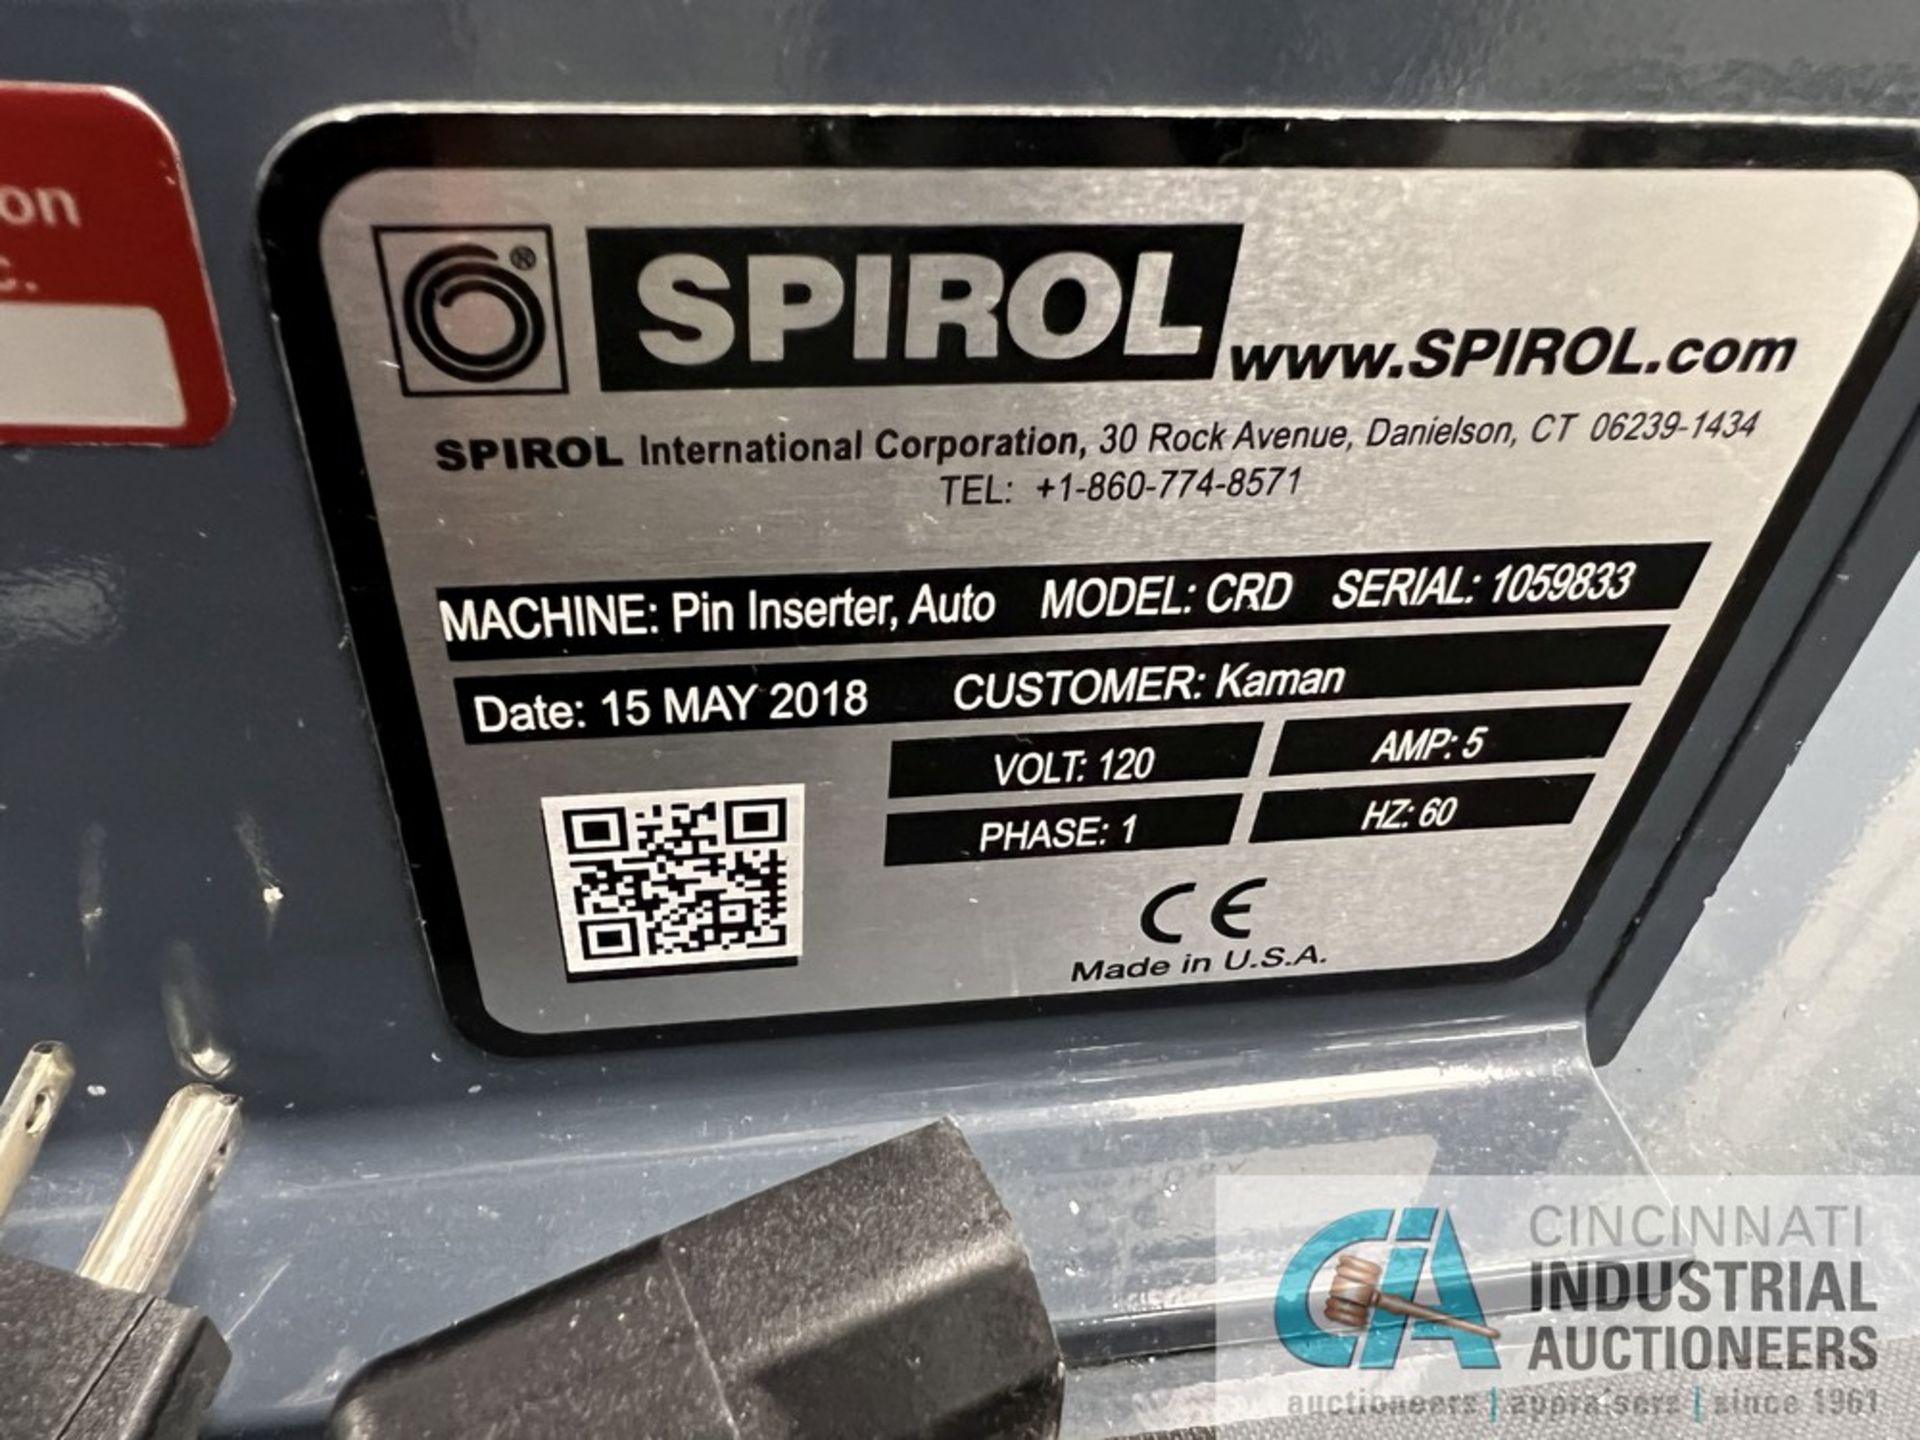 SPIROL MODEL CRD AUTO PIN INSERTER; S/N 10559833, WITH (2) 7" VIBRATORY BOWLS (2018) (JPF) - Image 9 of 9